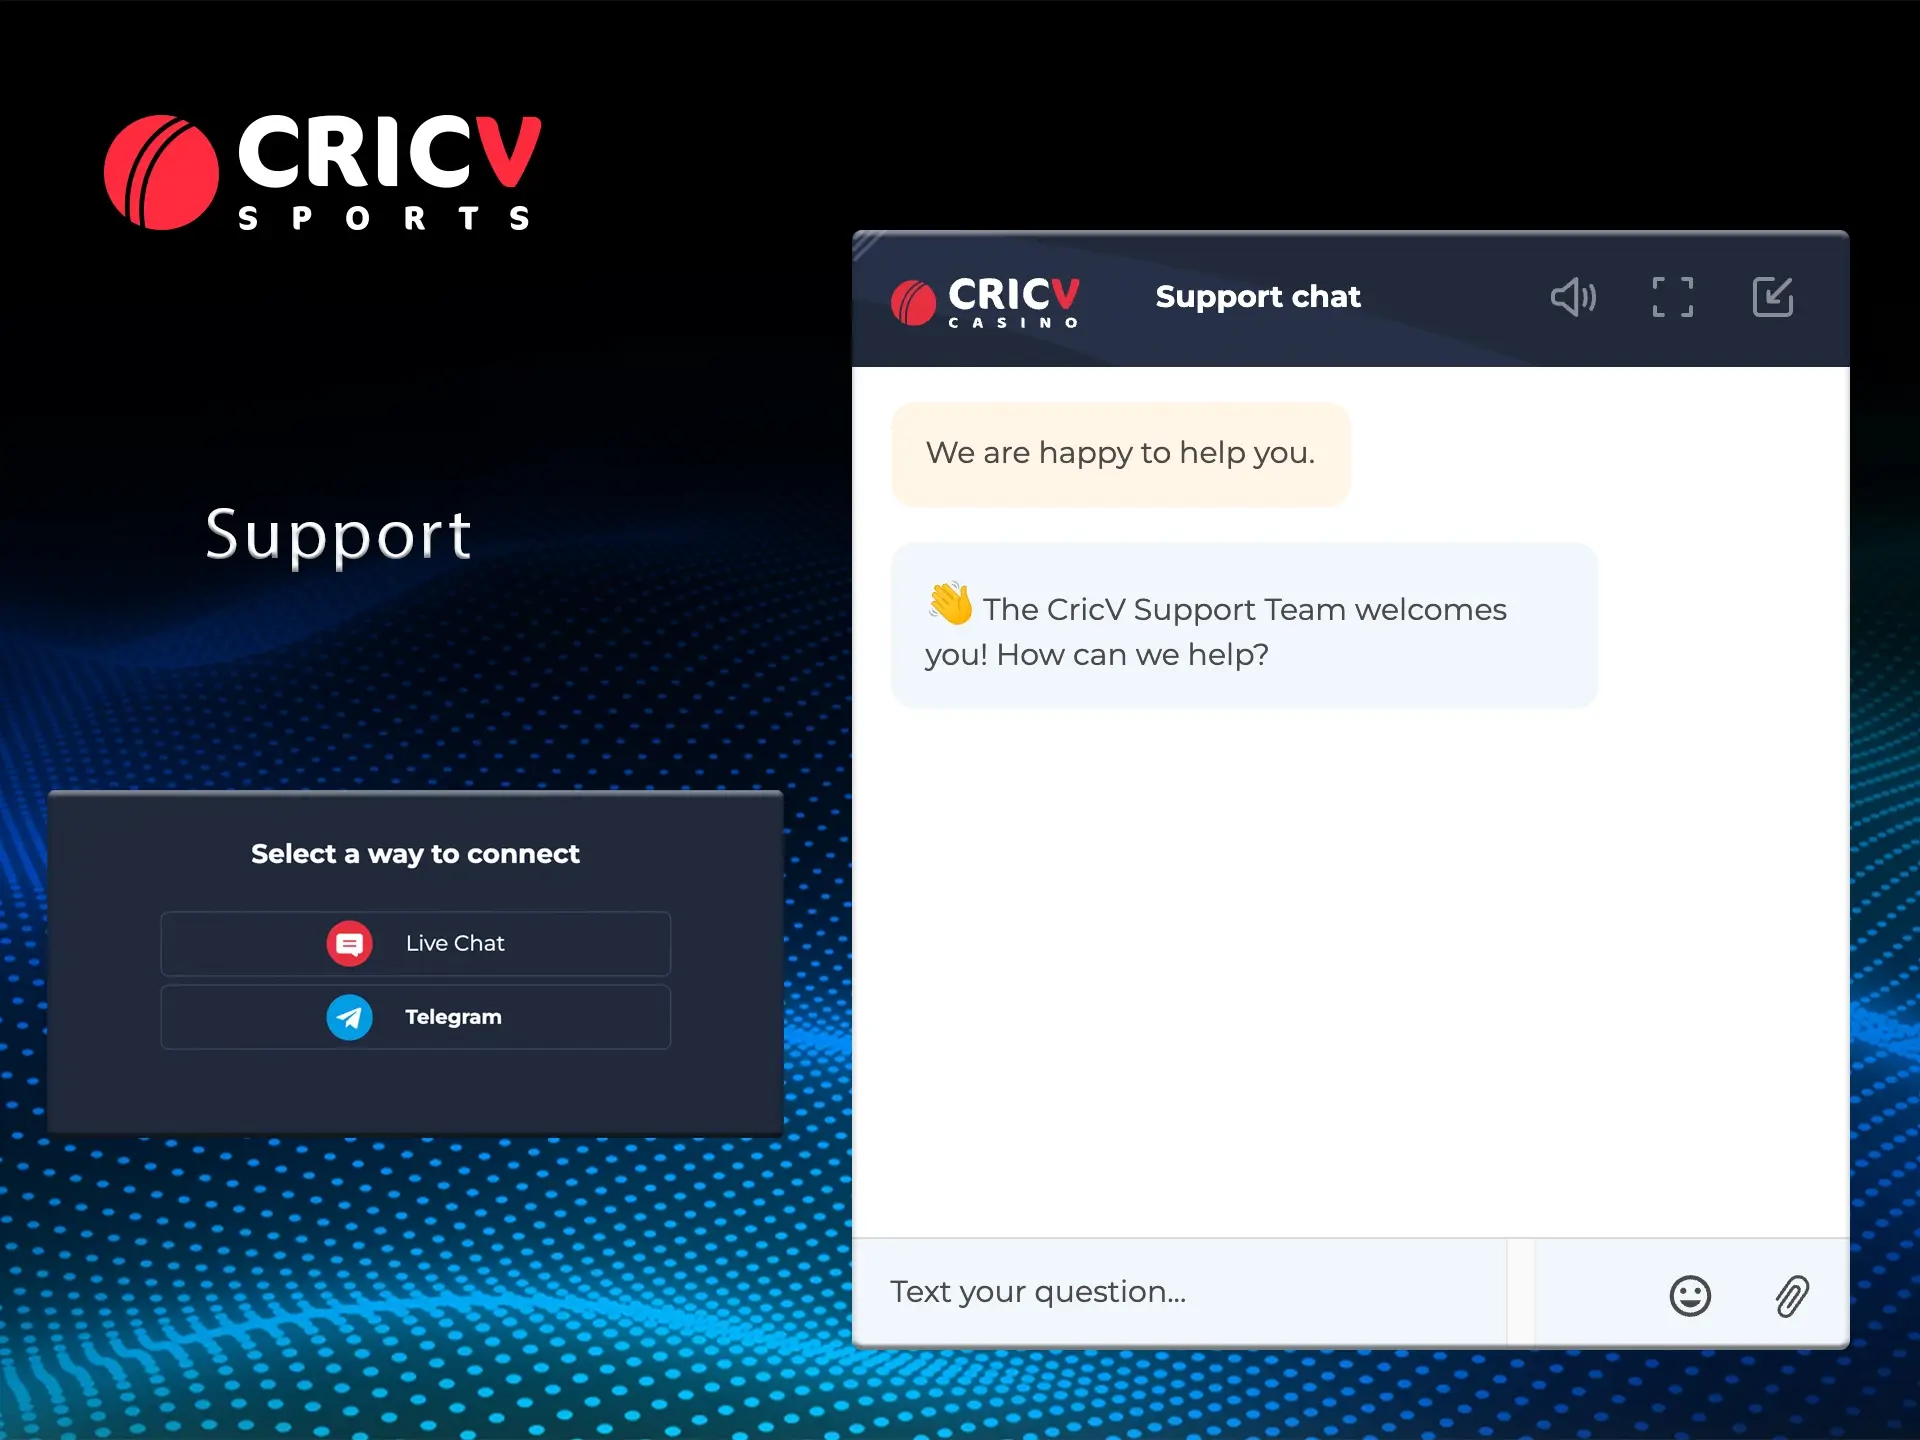 Cricv cares about the quality of its services and so any question you have will not go unattended.